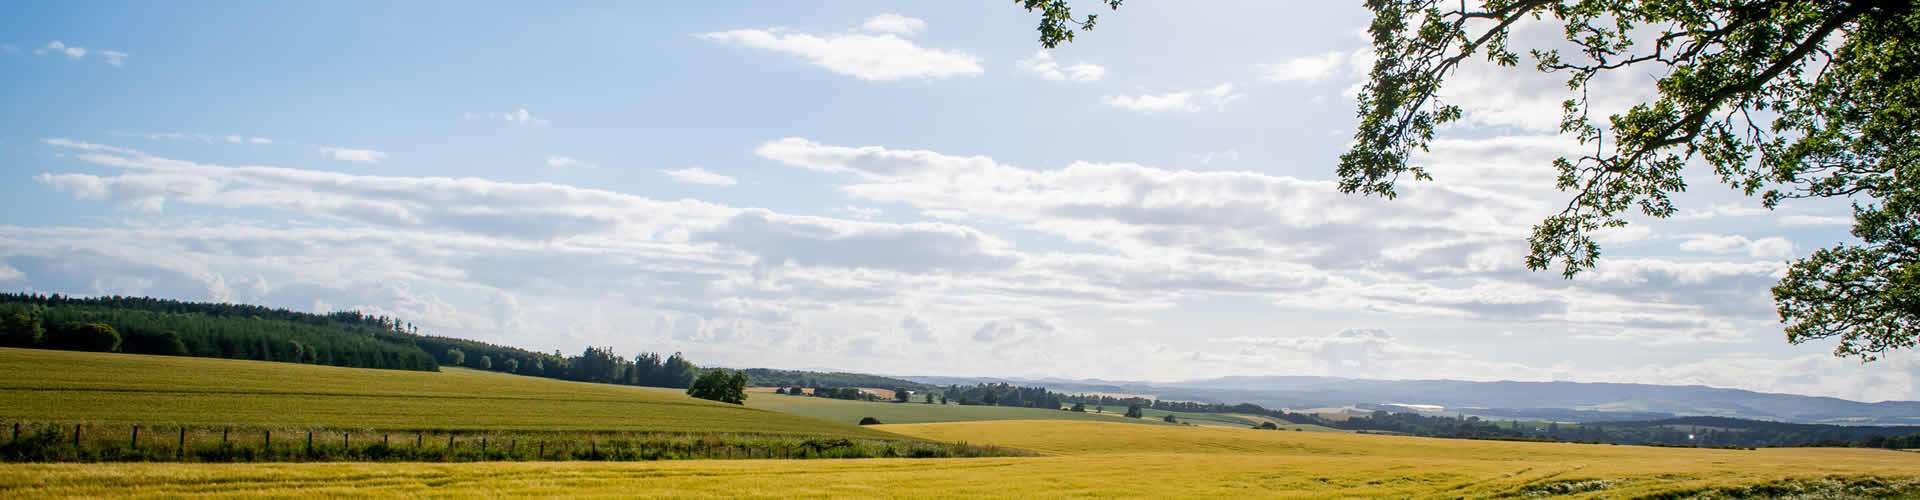 New homes for sale in Perthshire